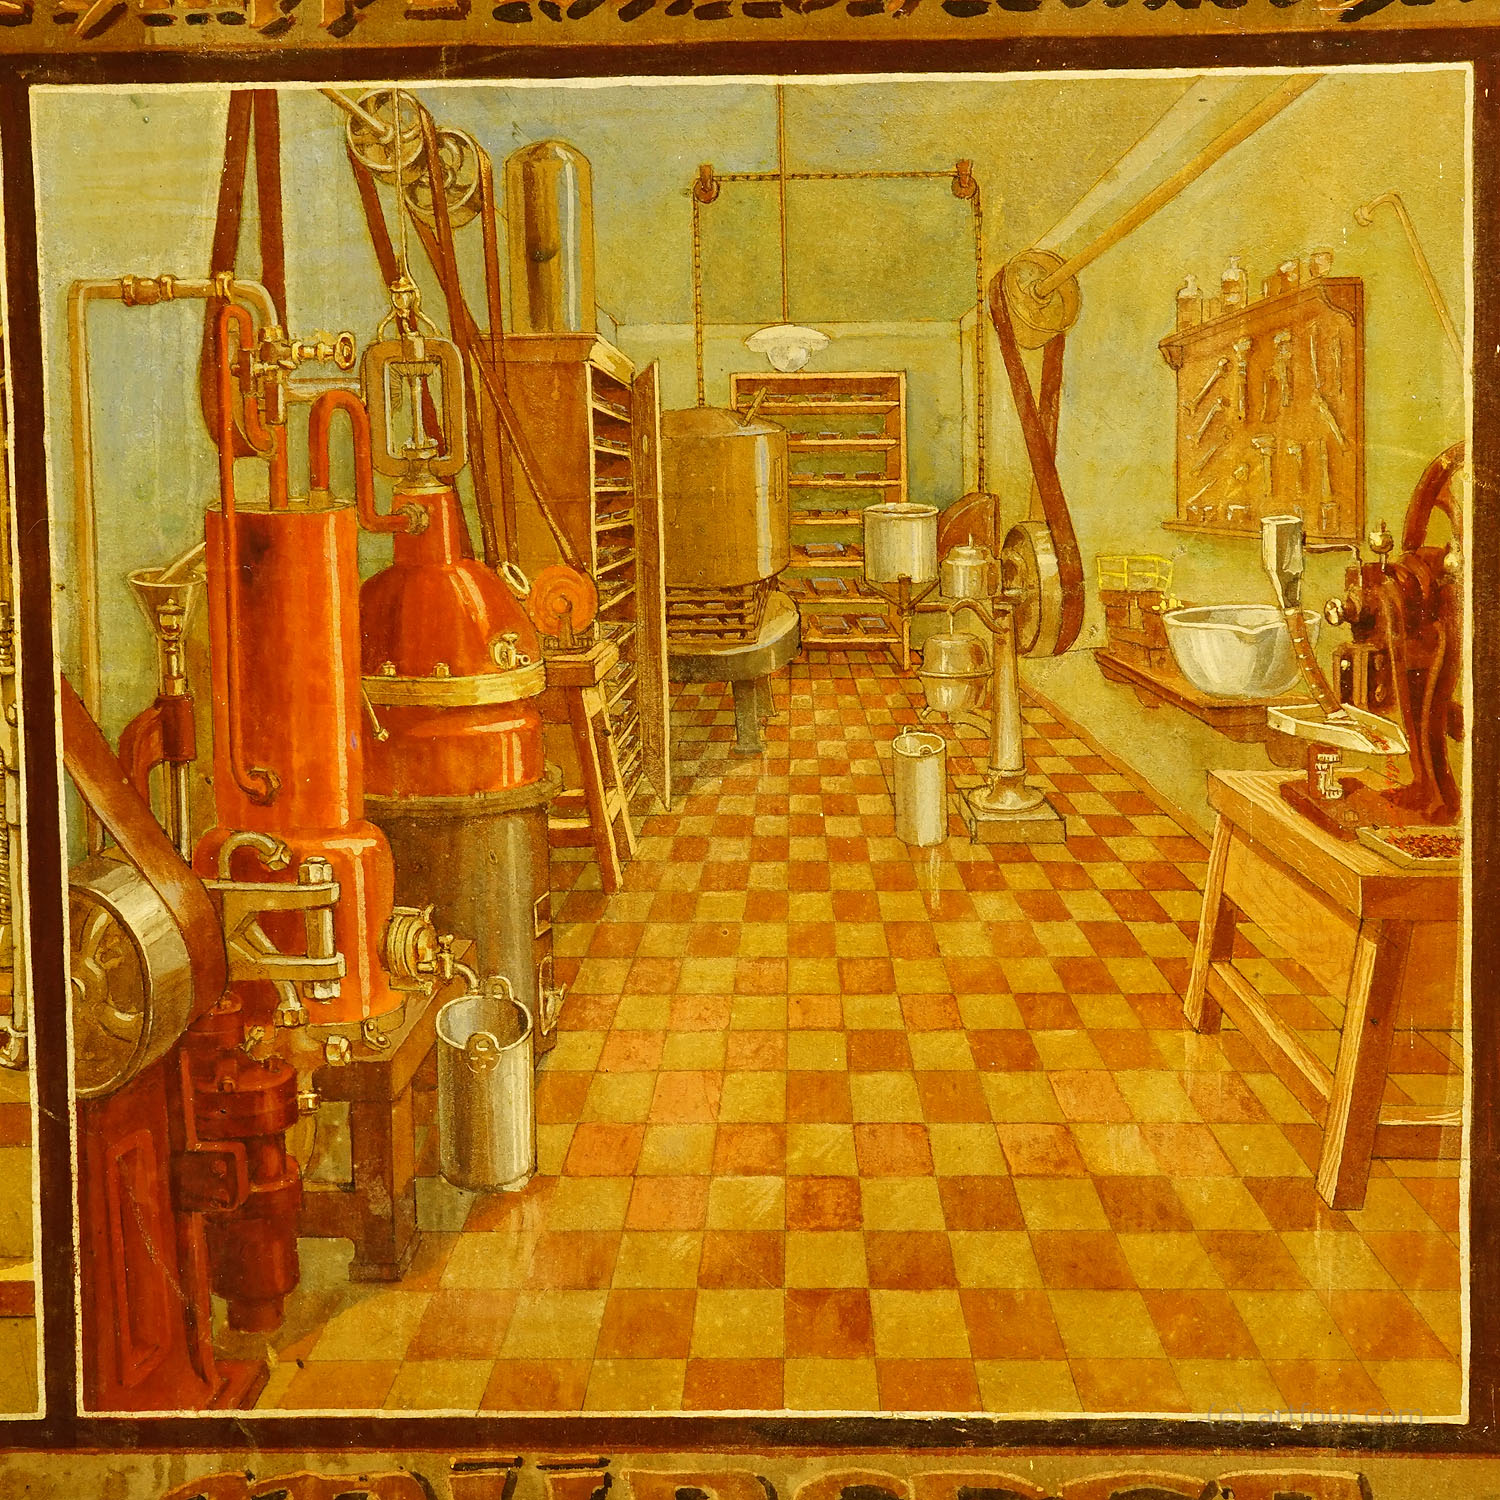 Antique Handpainted Advertising Poster for a Hemoglobin Fabrication in Munich